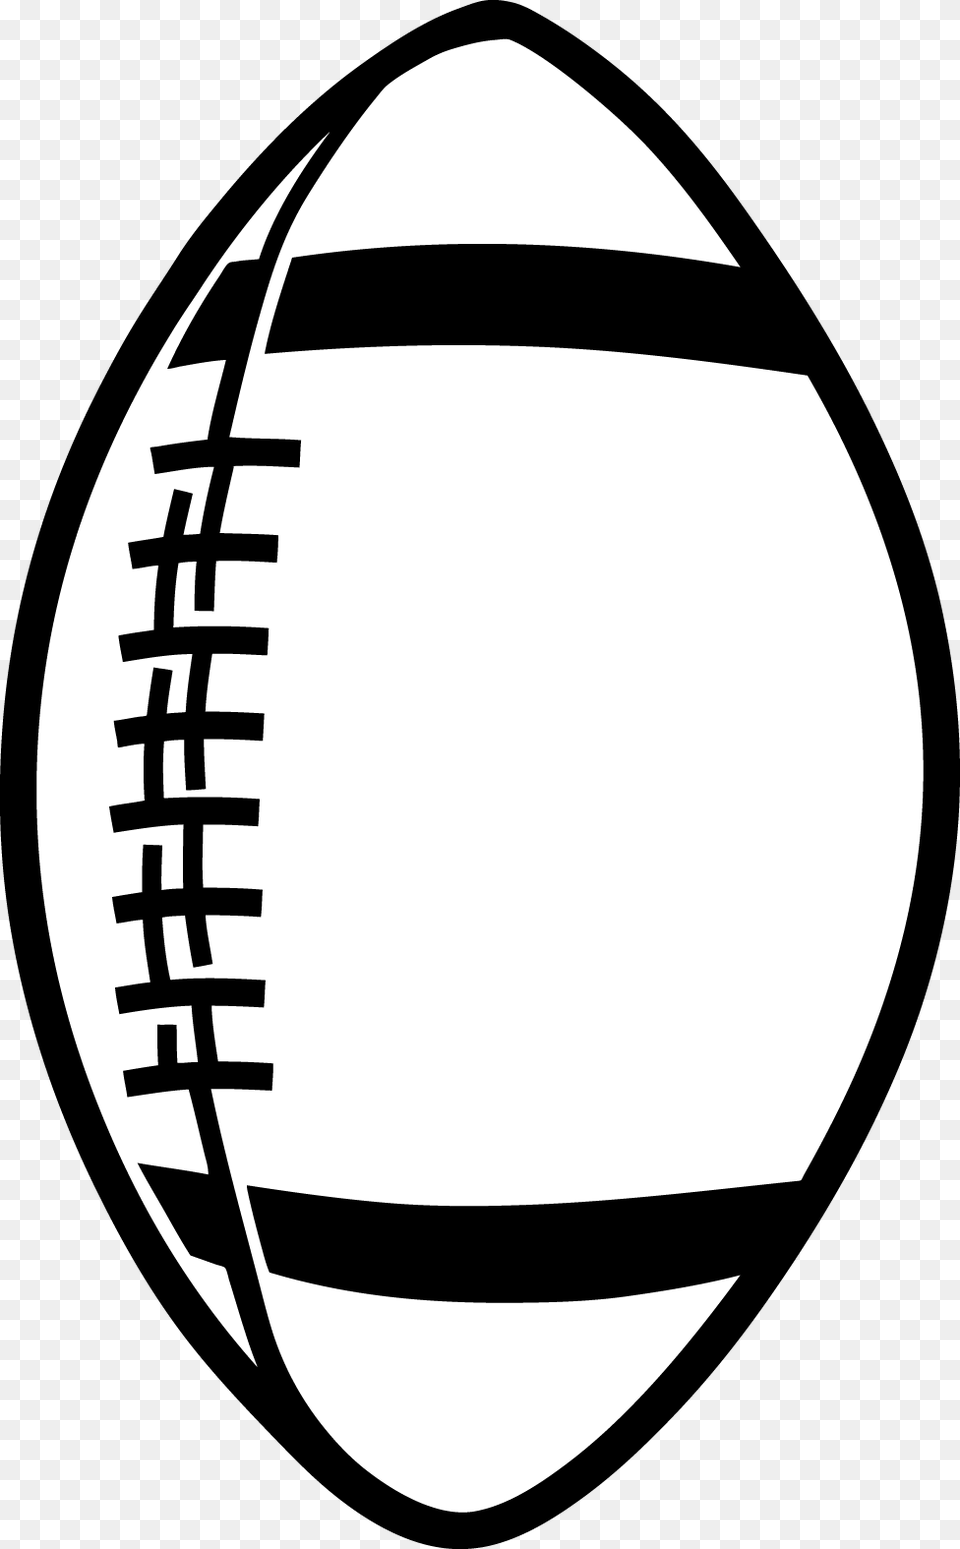 Football Image Clipart Free Png Download